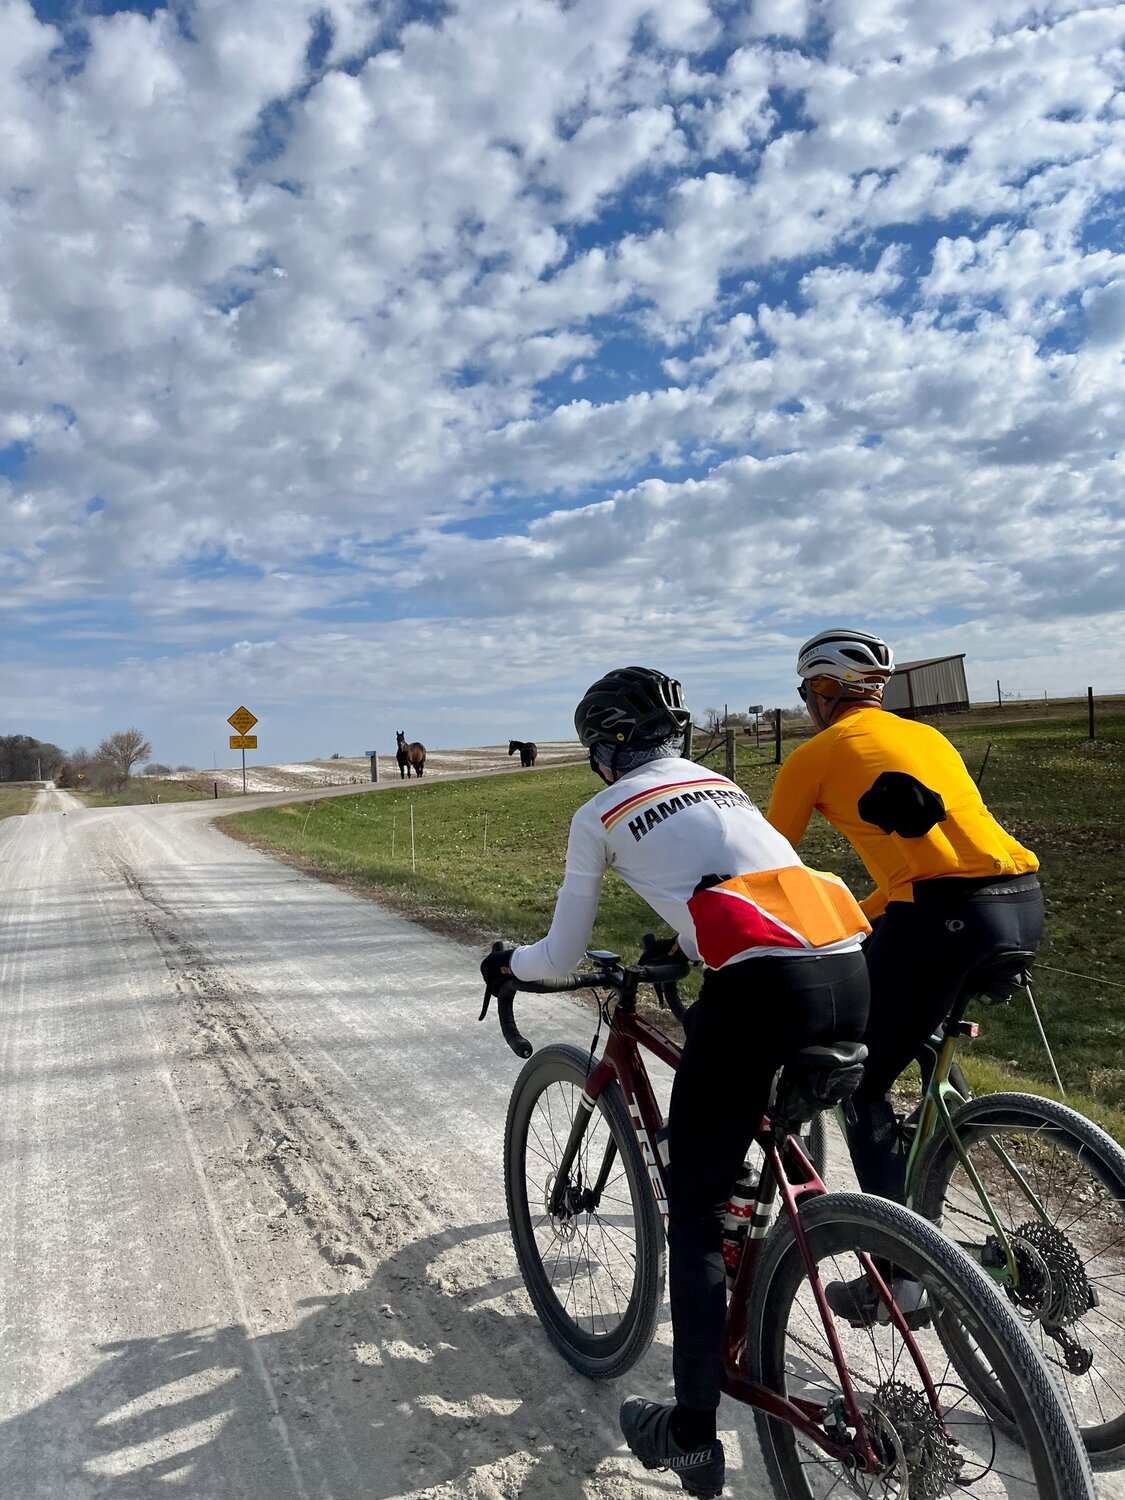 Refined gravel and horseshoe prints are characteristic of Kalona’s backroads, making them the perfect location for an Iowa Gravel Series cycling race.  Here, Mason Wilson rides with Charlie Bui north of Kalona.